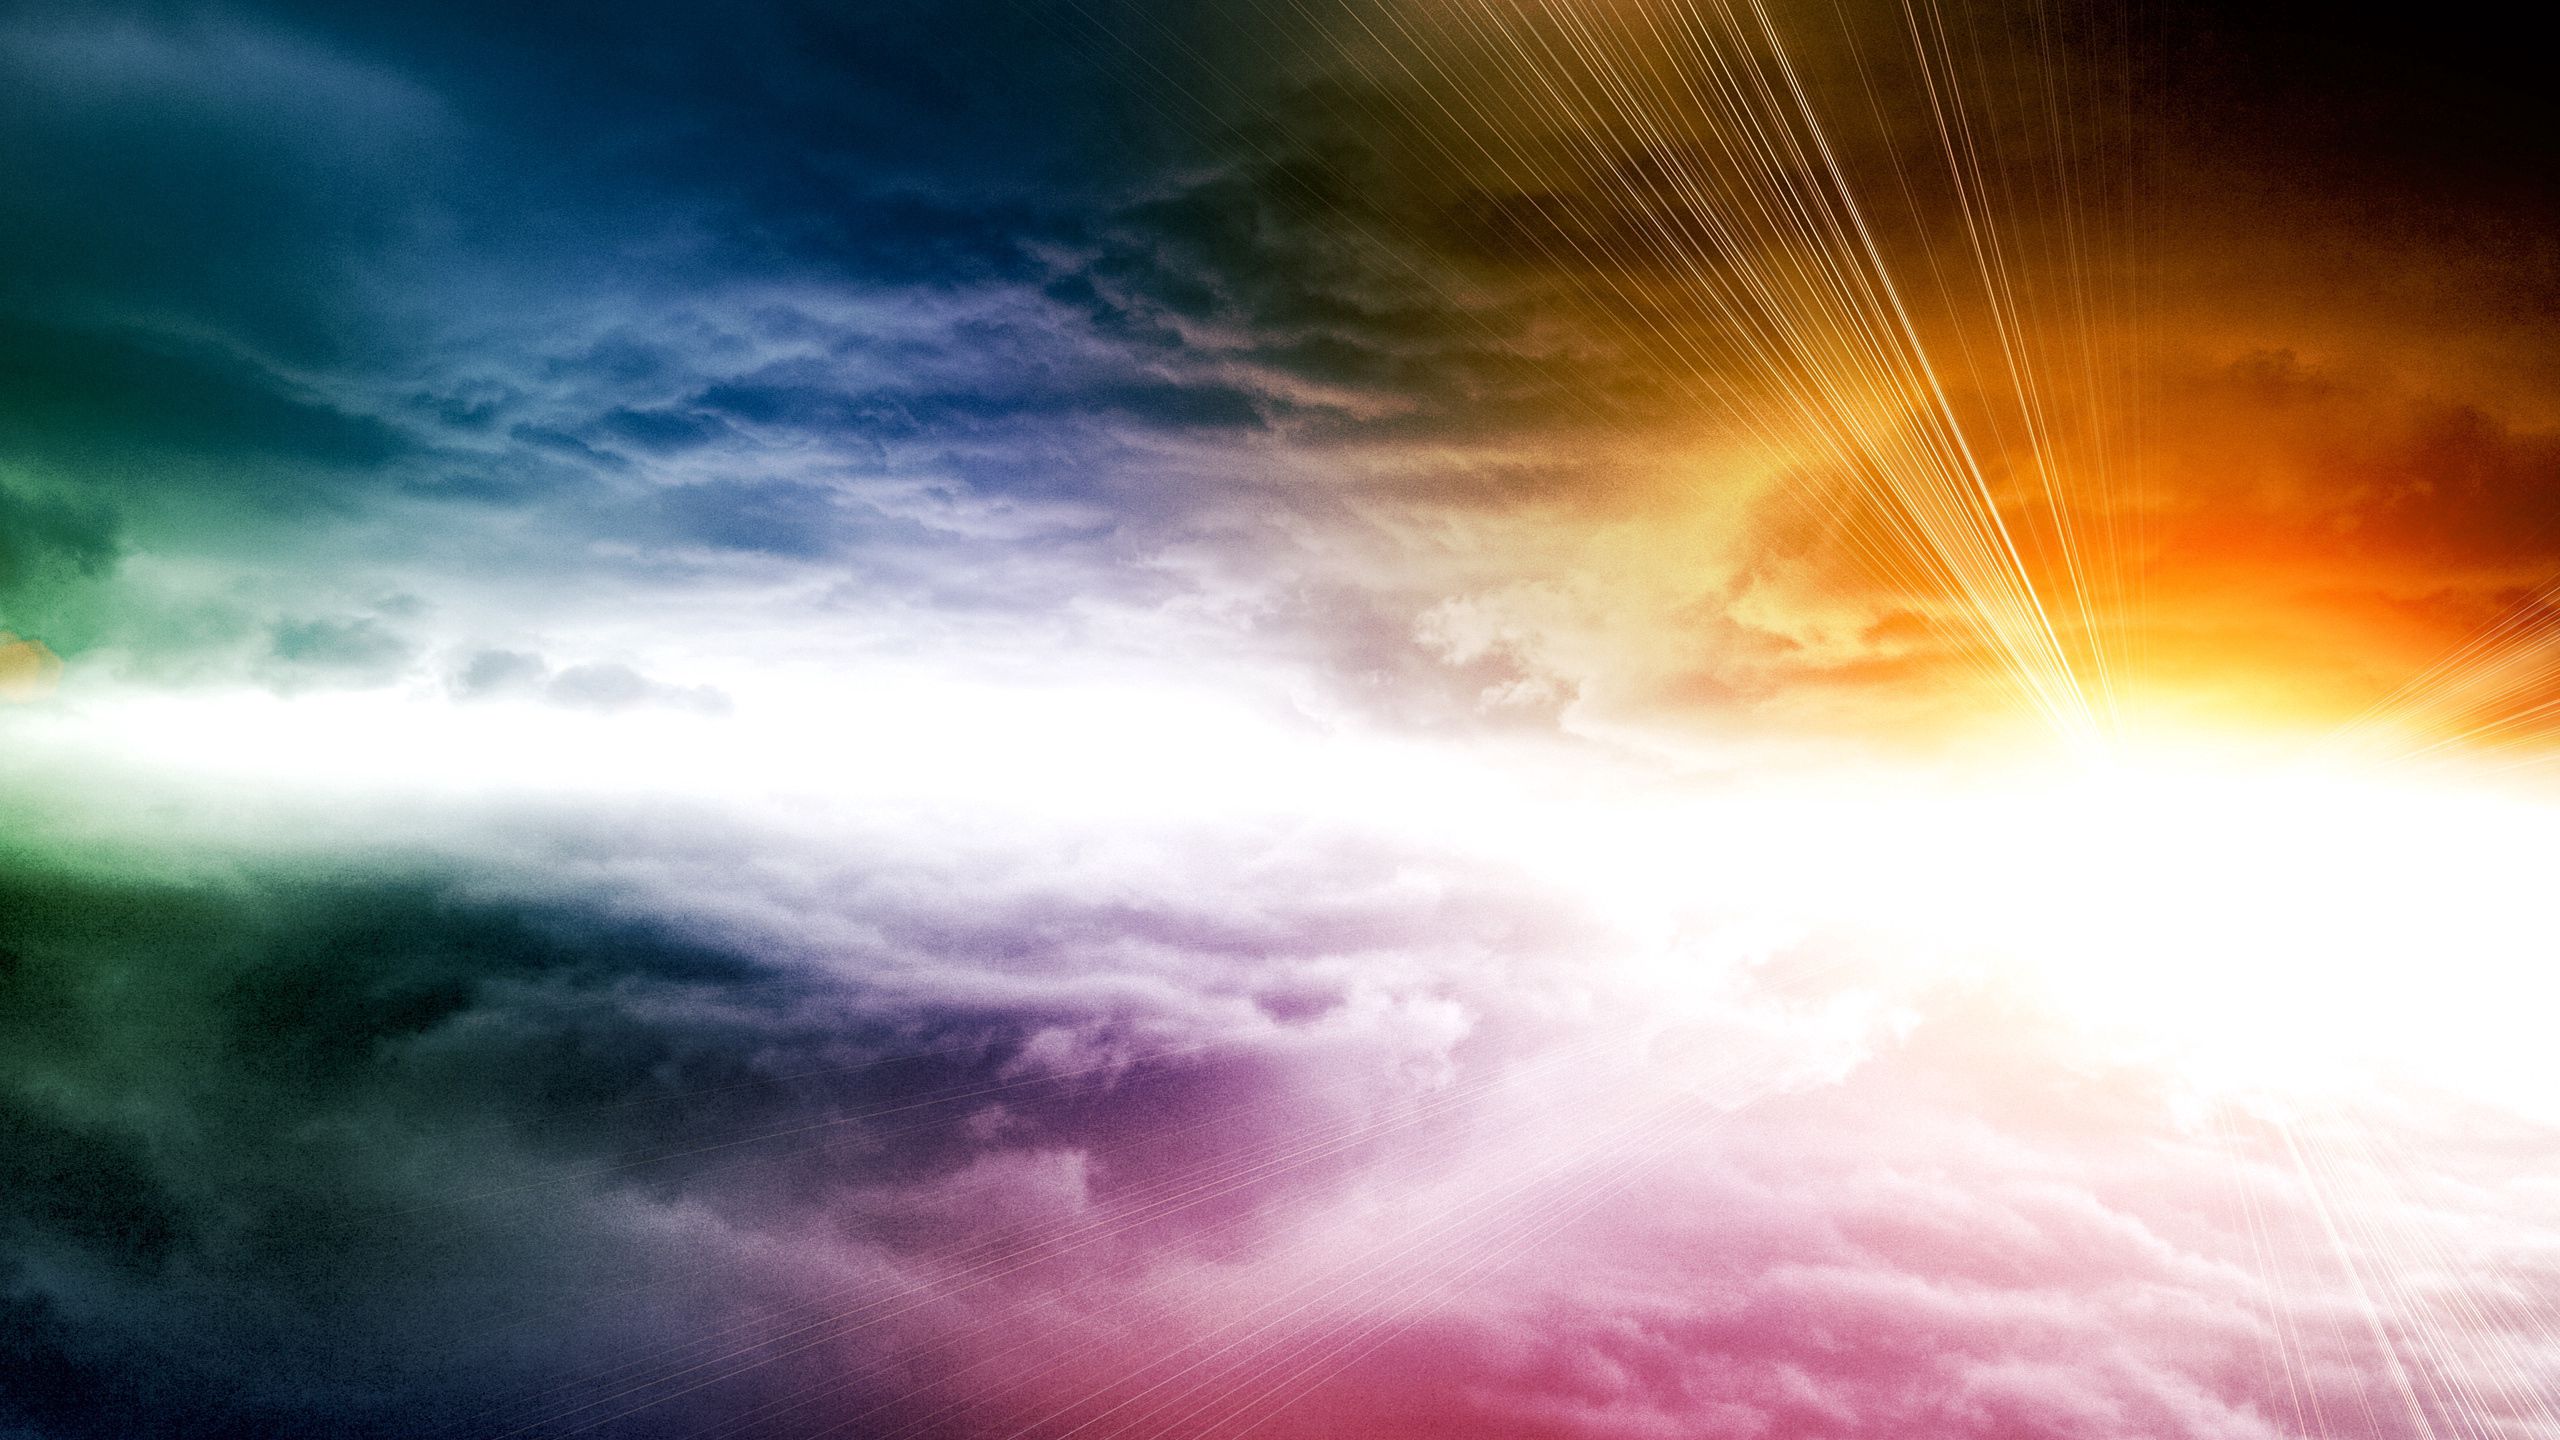 Download wallpaper 2560x1440 sky, rainbow, colorful, light, play of light  widescreen 16:9 hd background